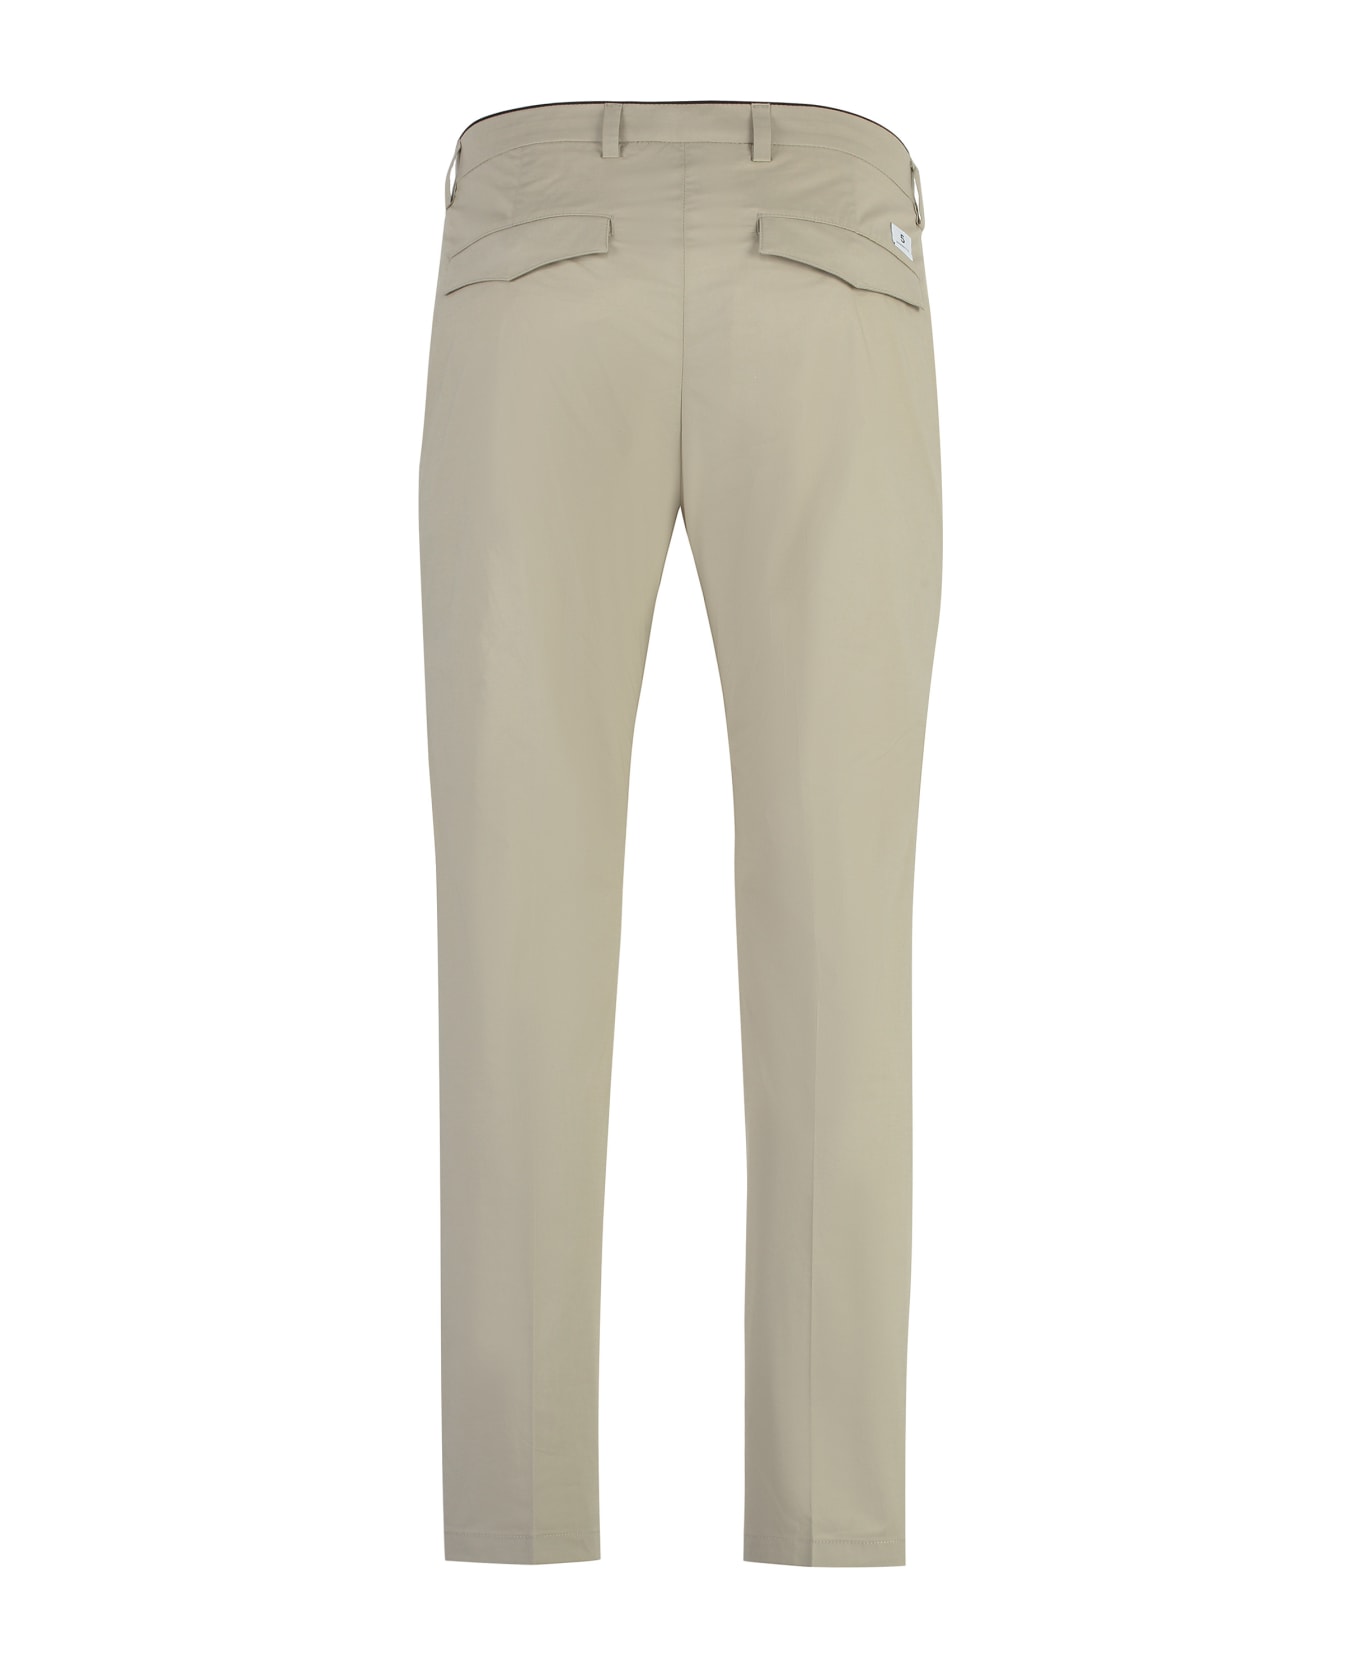 Department Five Prince Chino Pants - Beige ボトムス